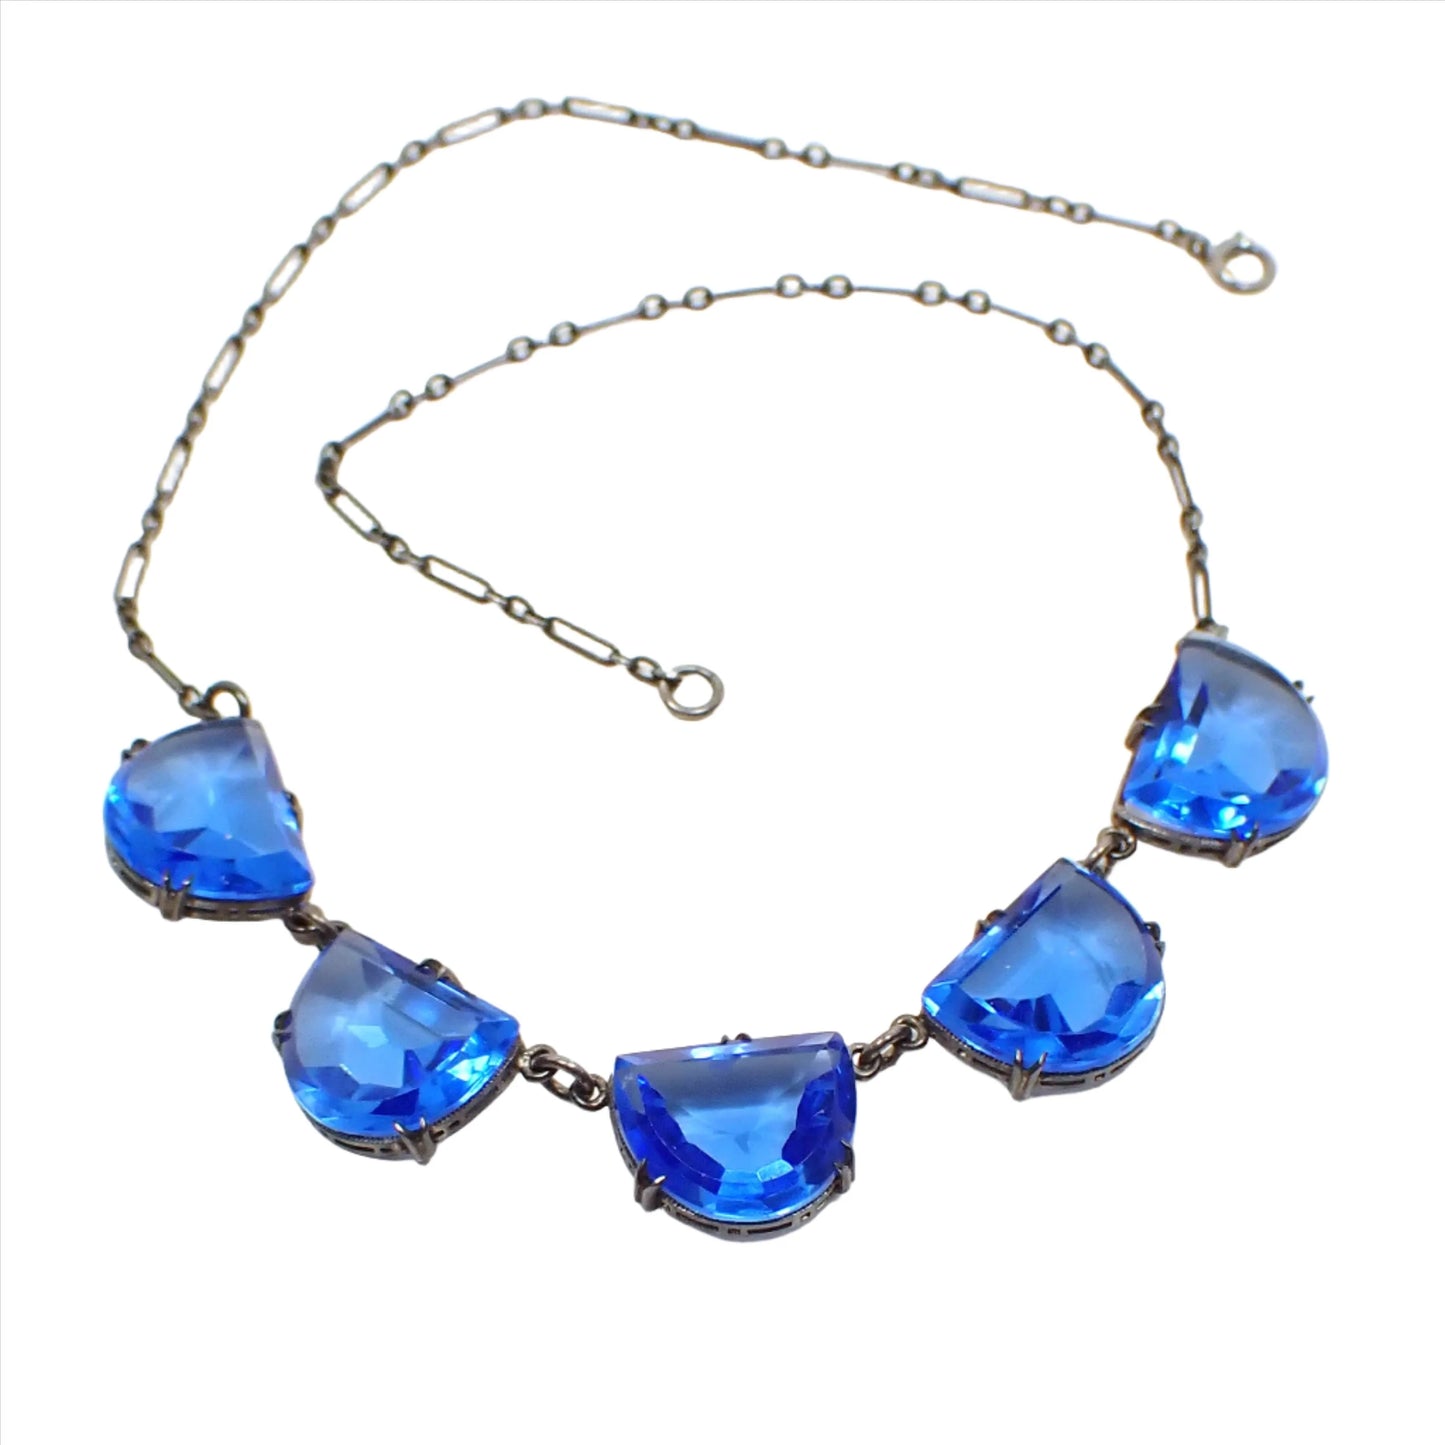 Top view of the 1930's Art Deco Czech glass necklace. The sterling silver chain and settings are darkened from age to a gray color. There are five scalloped semi circle drops that have faceted blue glass cabs. Each one is in a bezel setting with prongs to hold them in and they have an open back design. There is a spring ring clasp at the end.